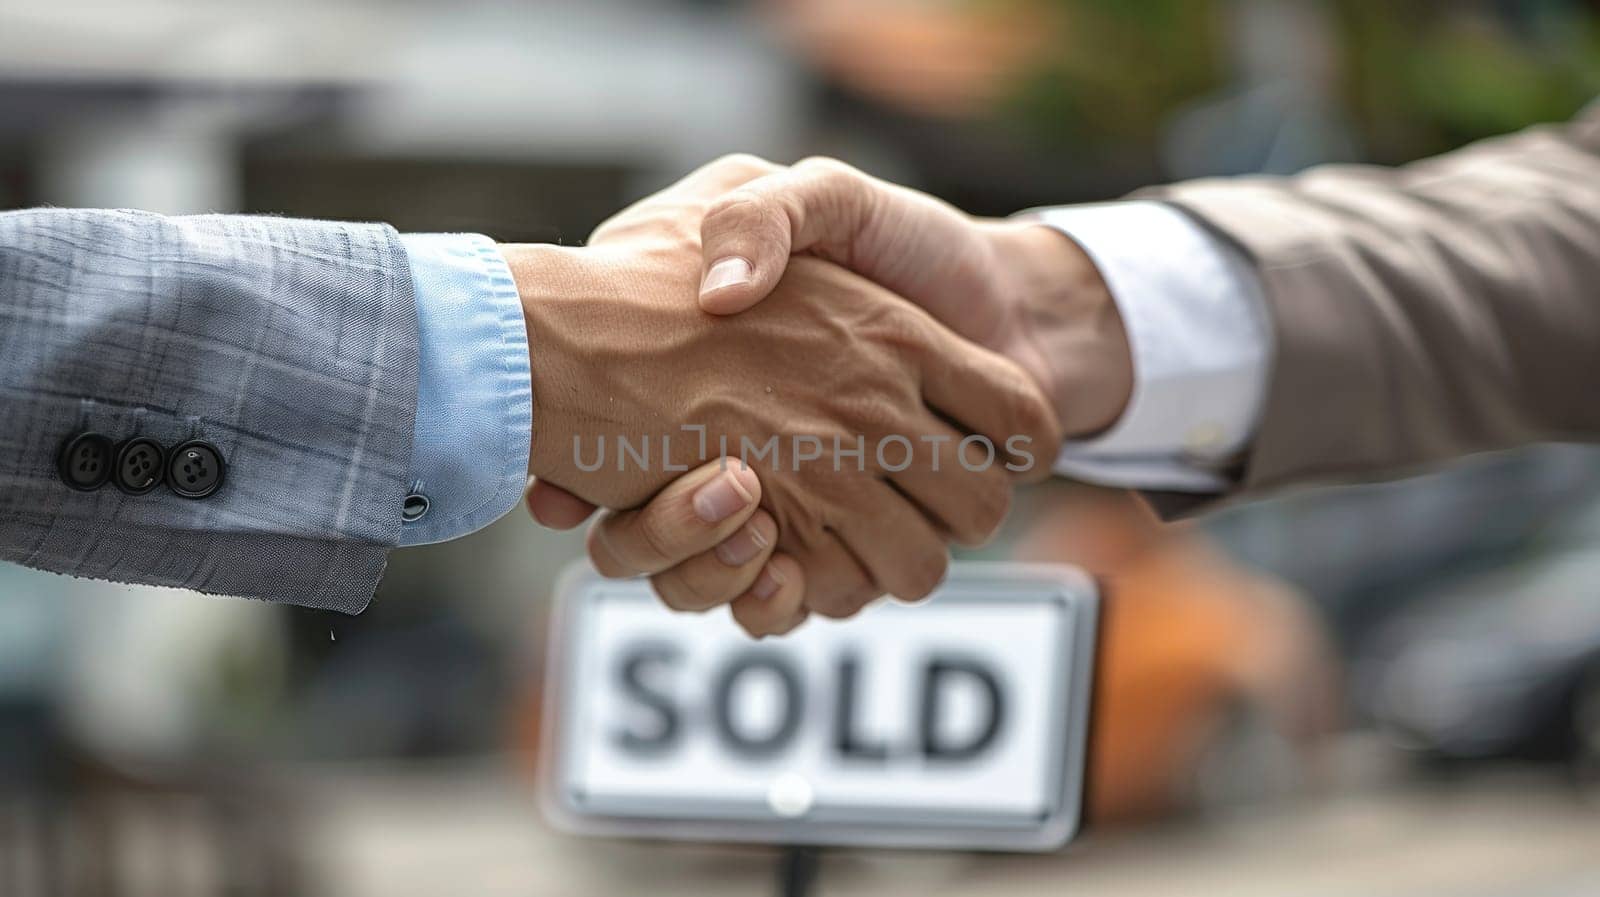 Two men shaking hands over a signed document that says Sold.